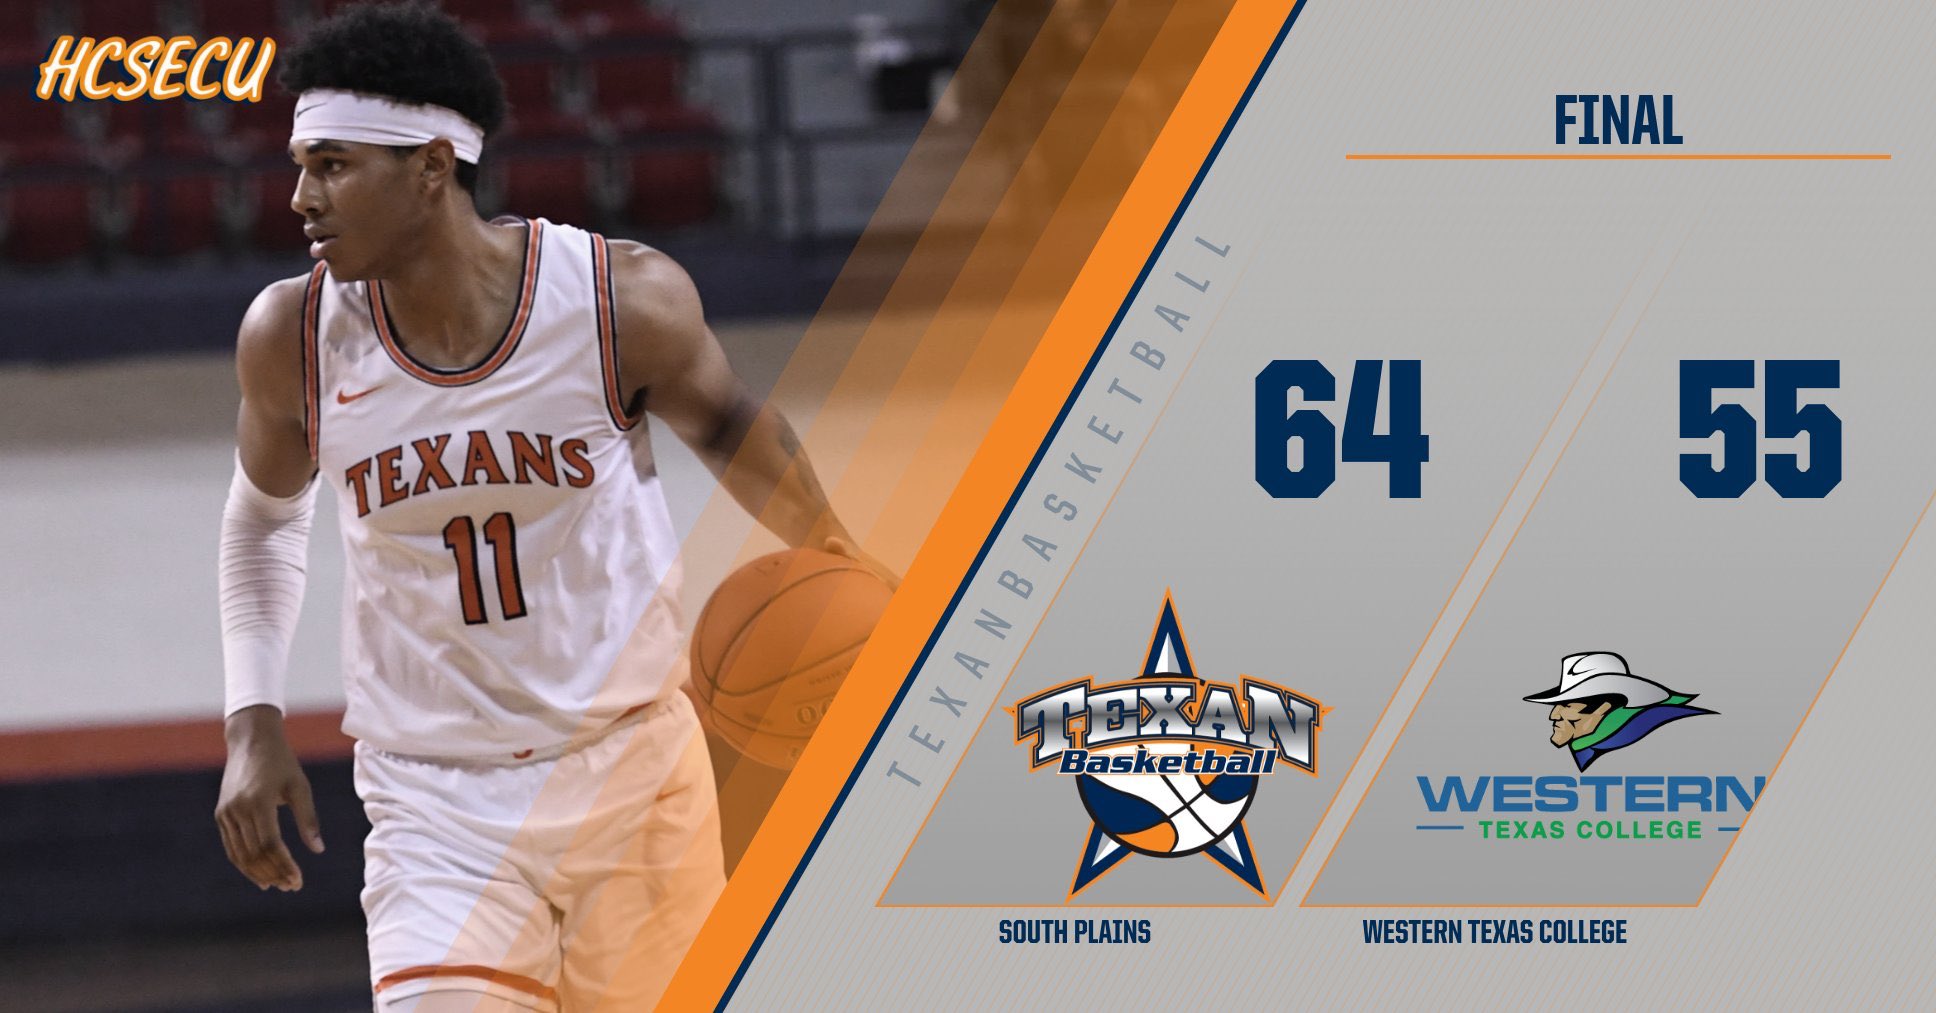 Soares' 21 points lift Texans past Western Texas 64-55 Monday in Snyder